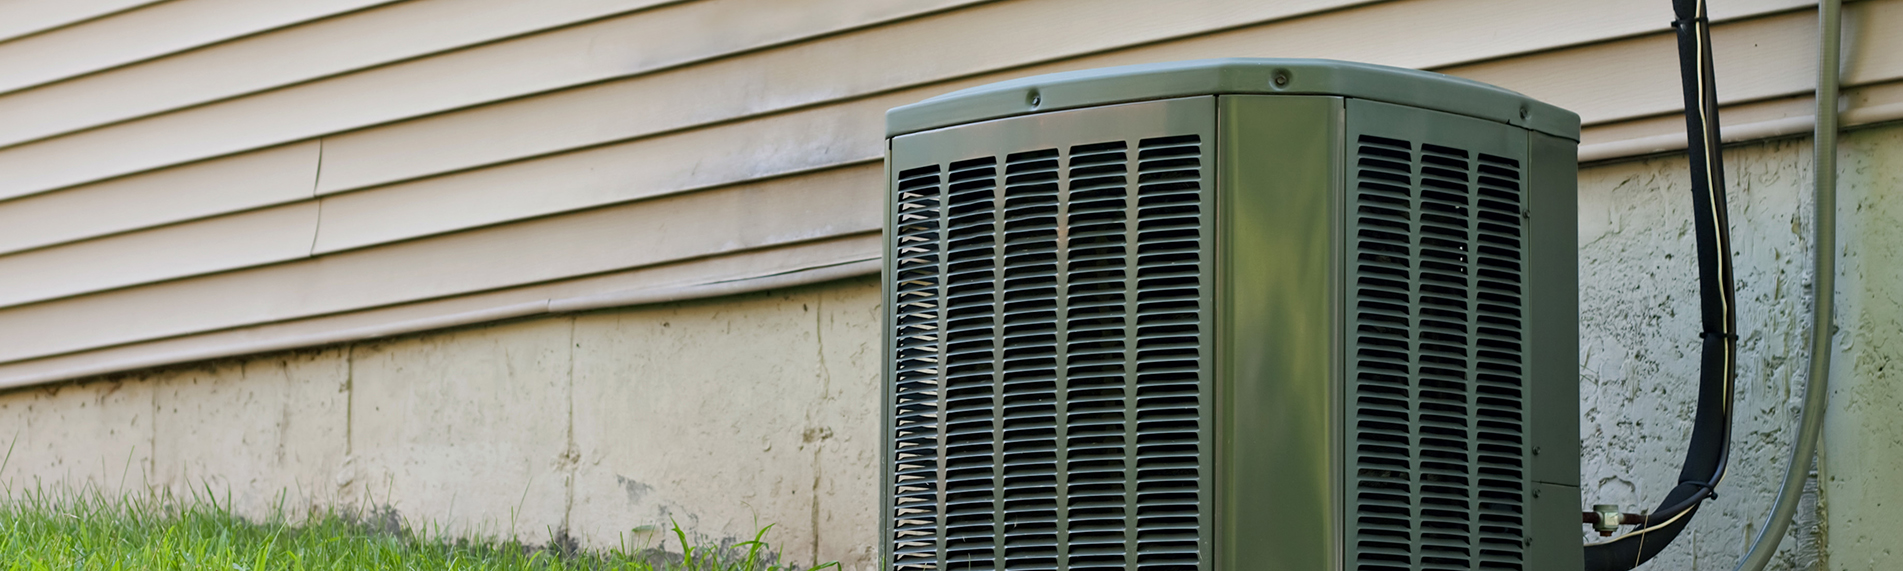 A residential central air conditioning unit sitting outside a home used for regulating the homes AC to a comfortable level.